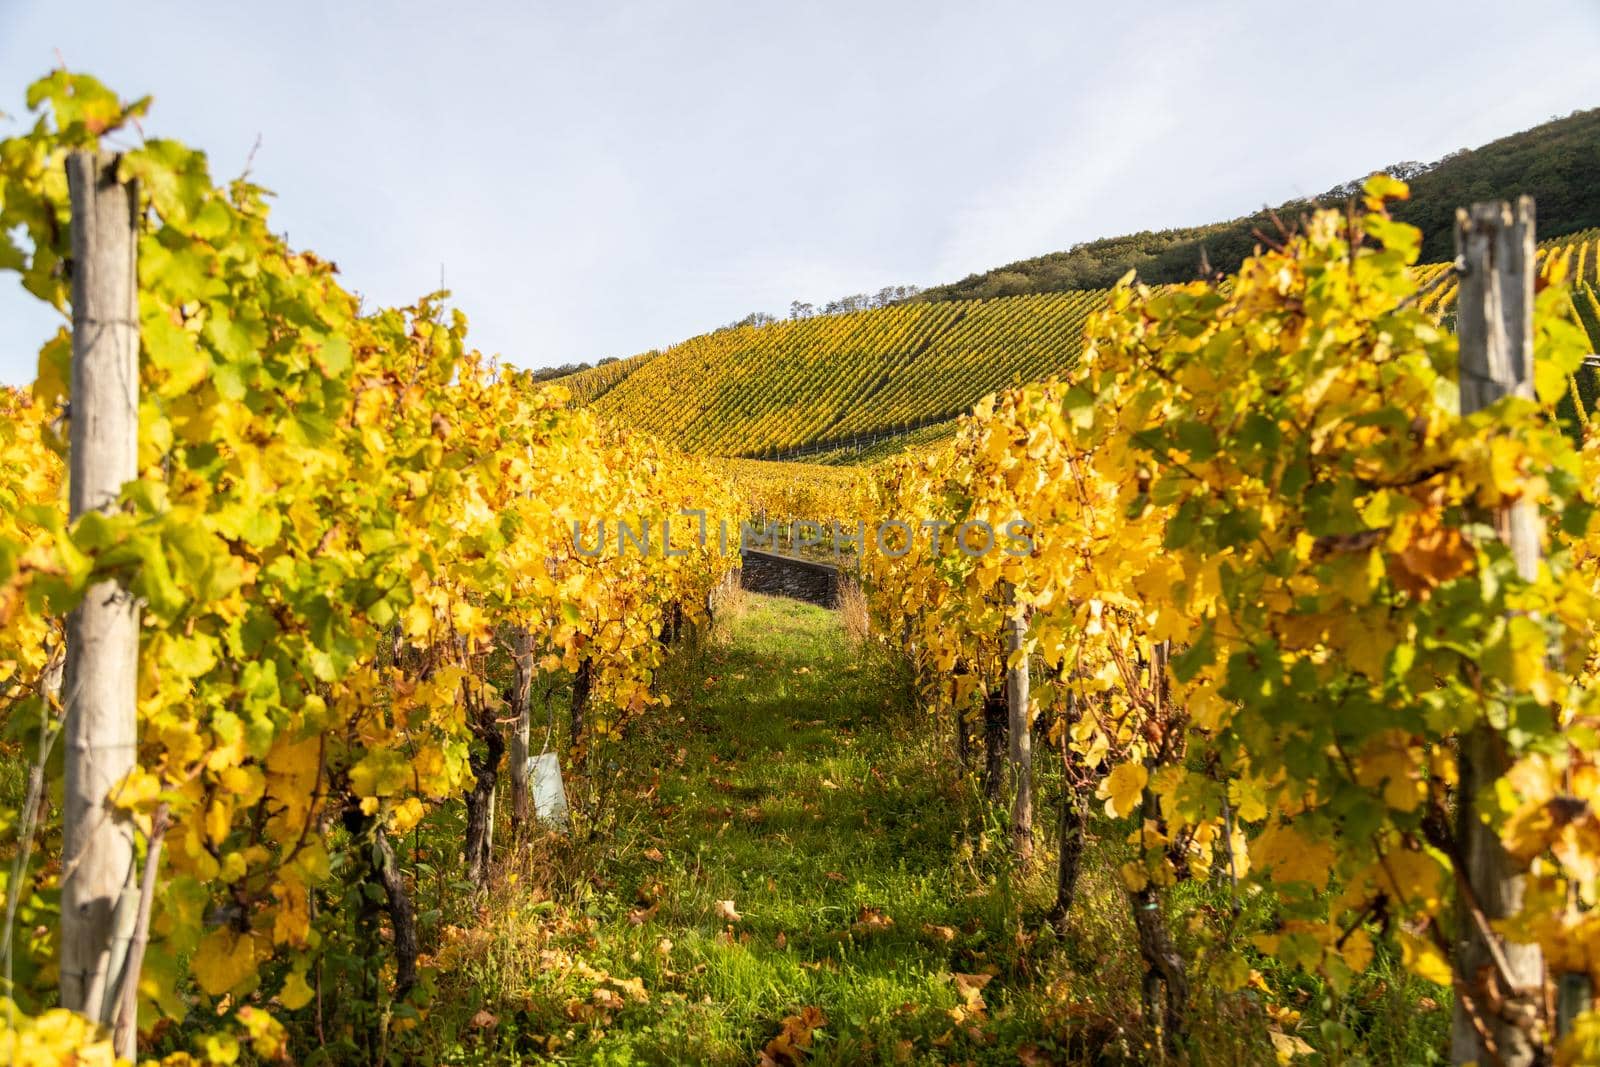 Multi colored vineyards near Bernkastel-Kues on river Moselle in autumn with yellow leaves and green grass on the ground